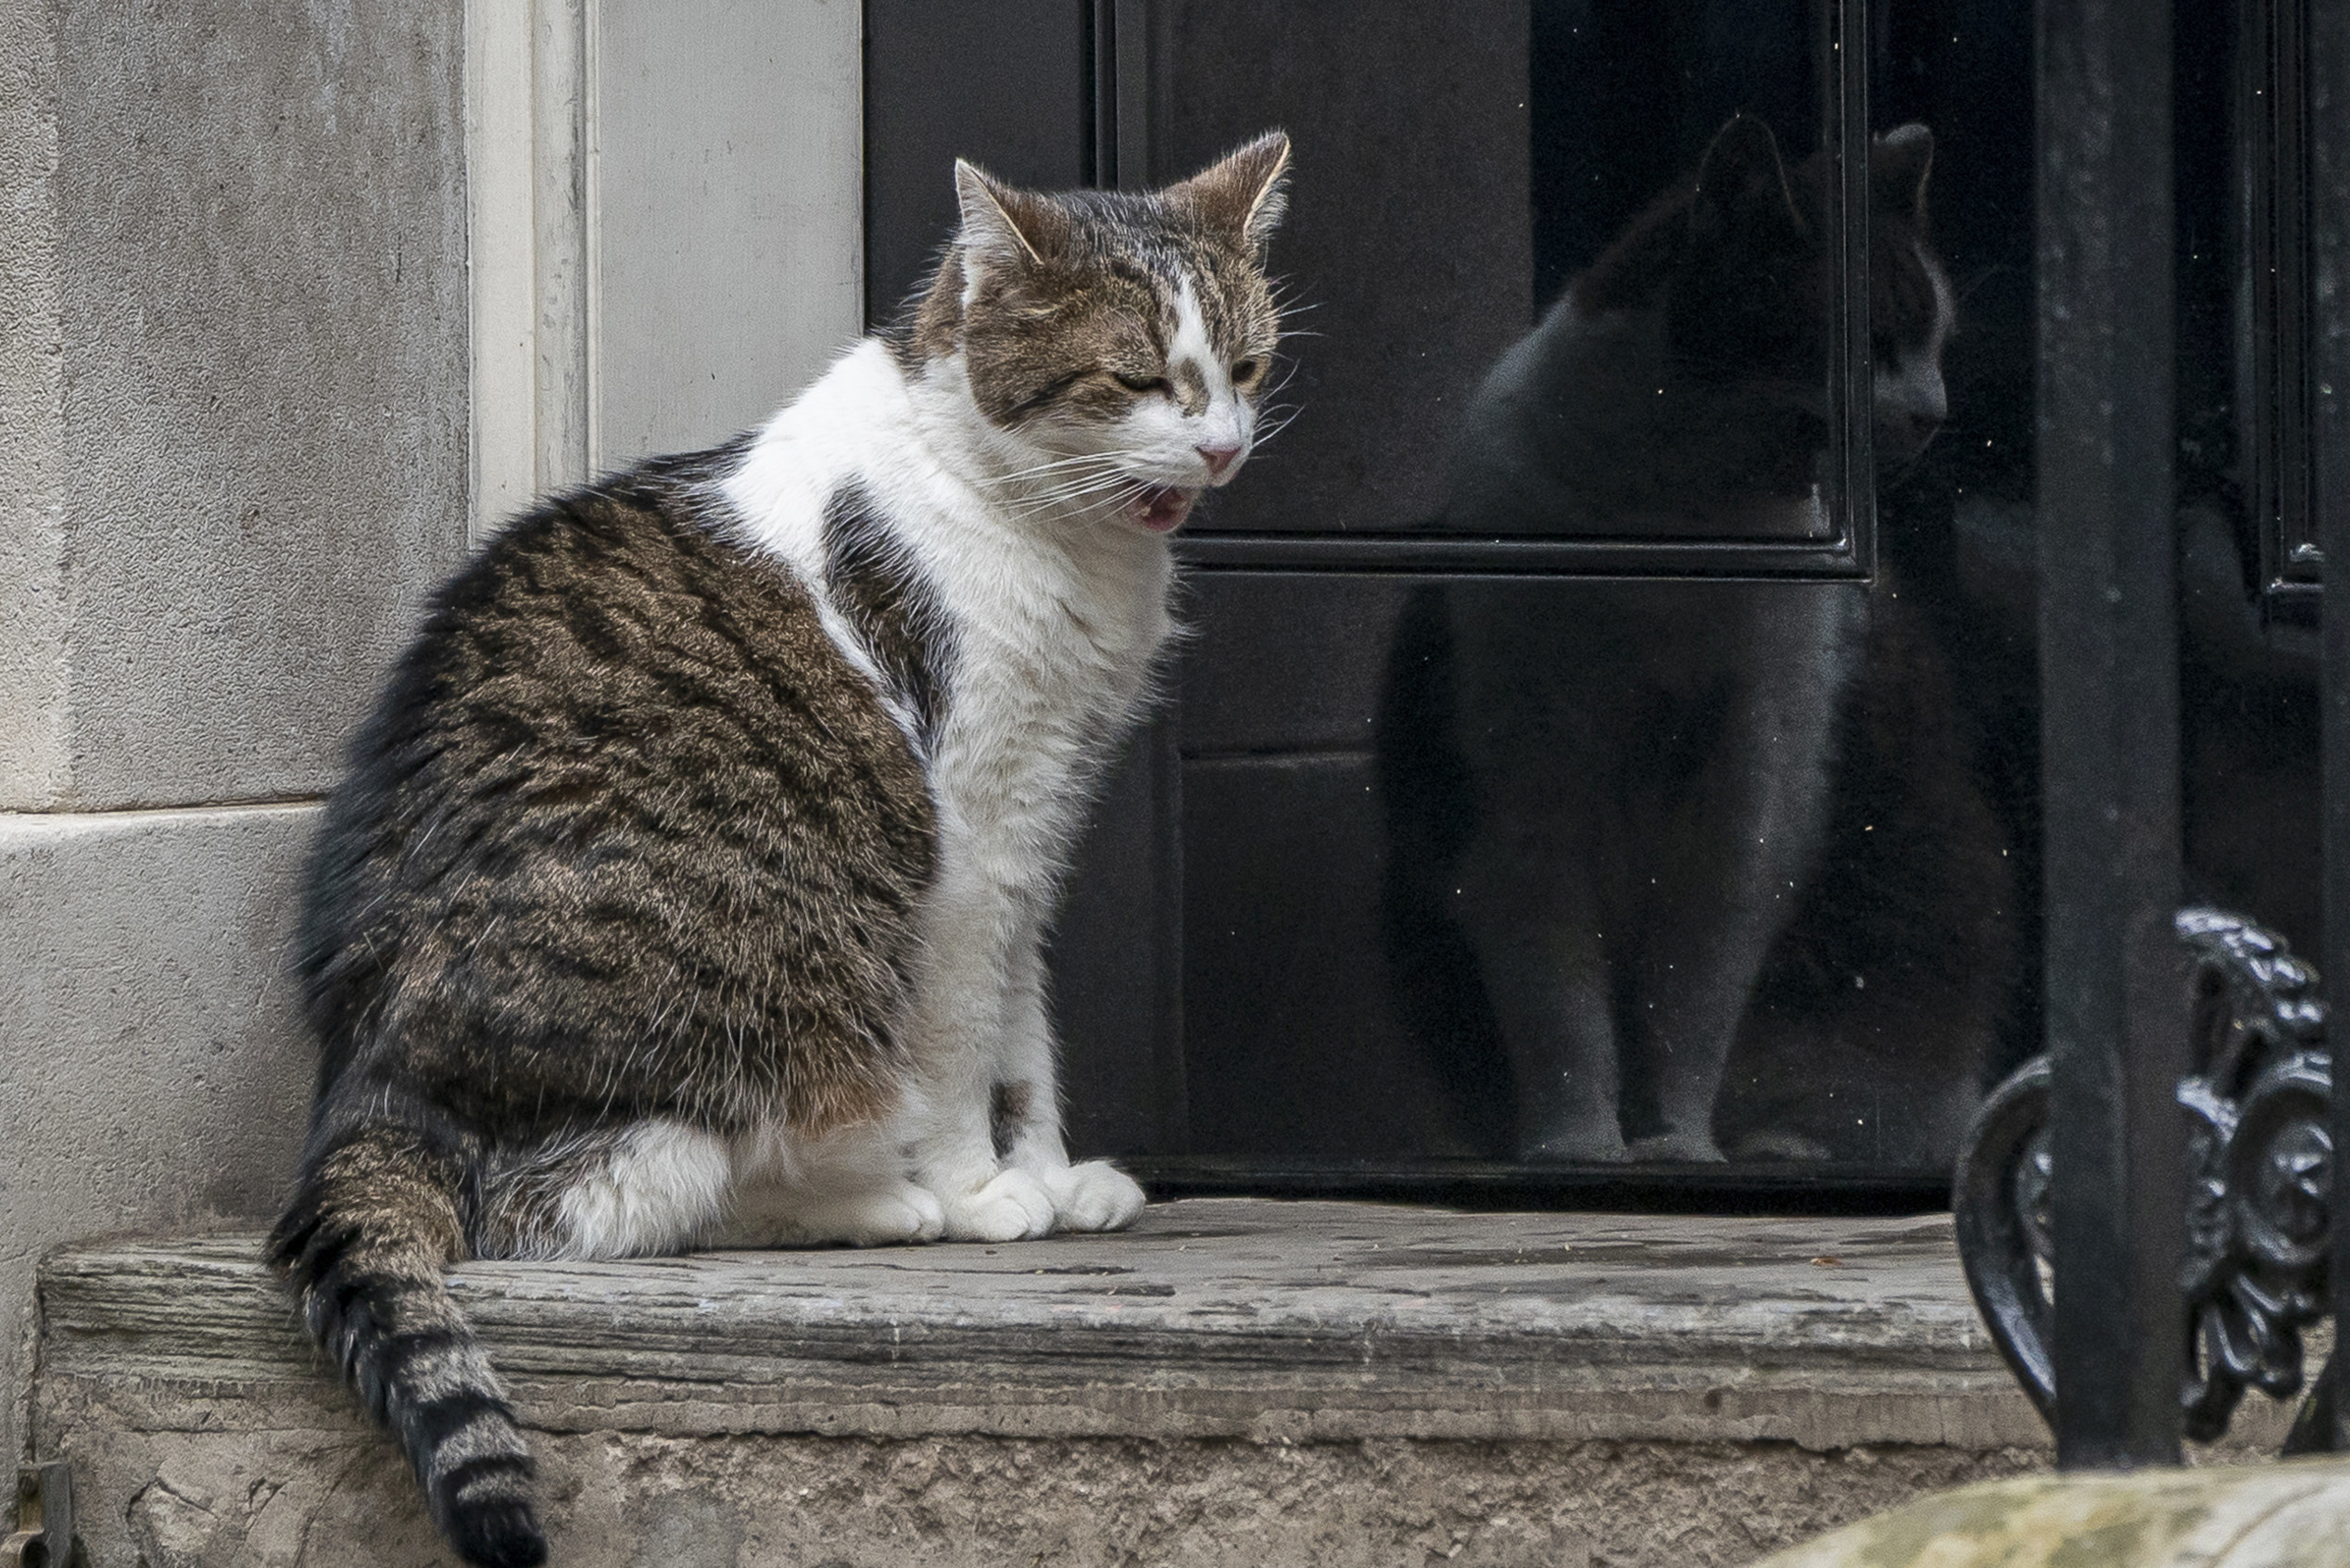 Chief Mouser to the Cabinet Office Larry the cat yawns in front of the door to Number 10, Downing Street, London